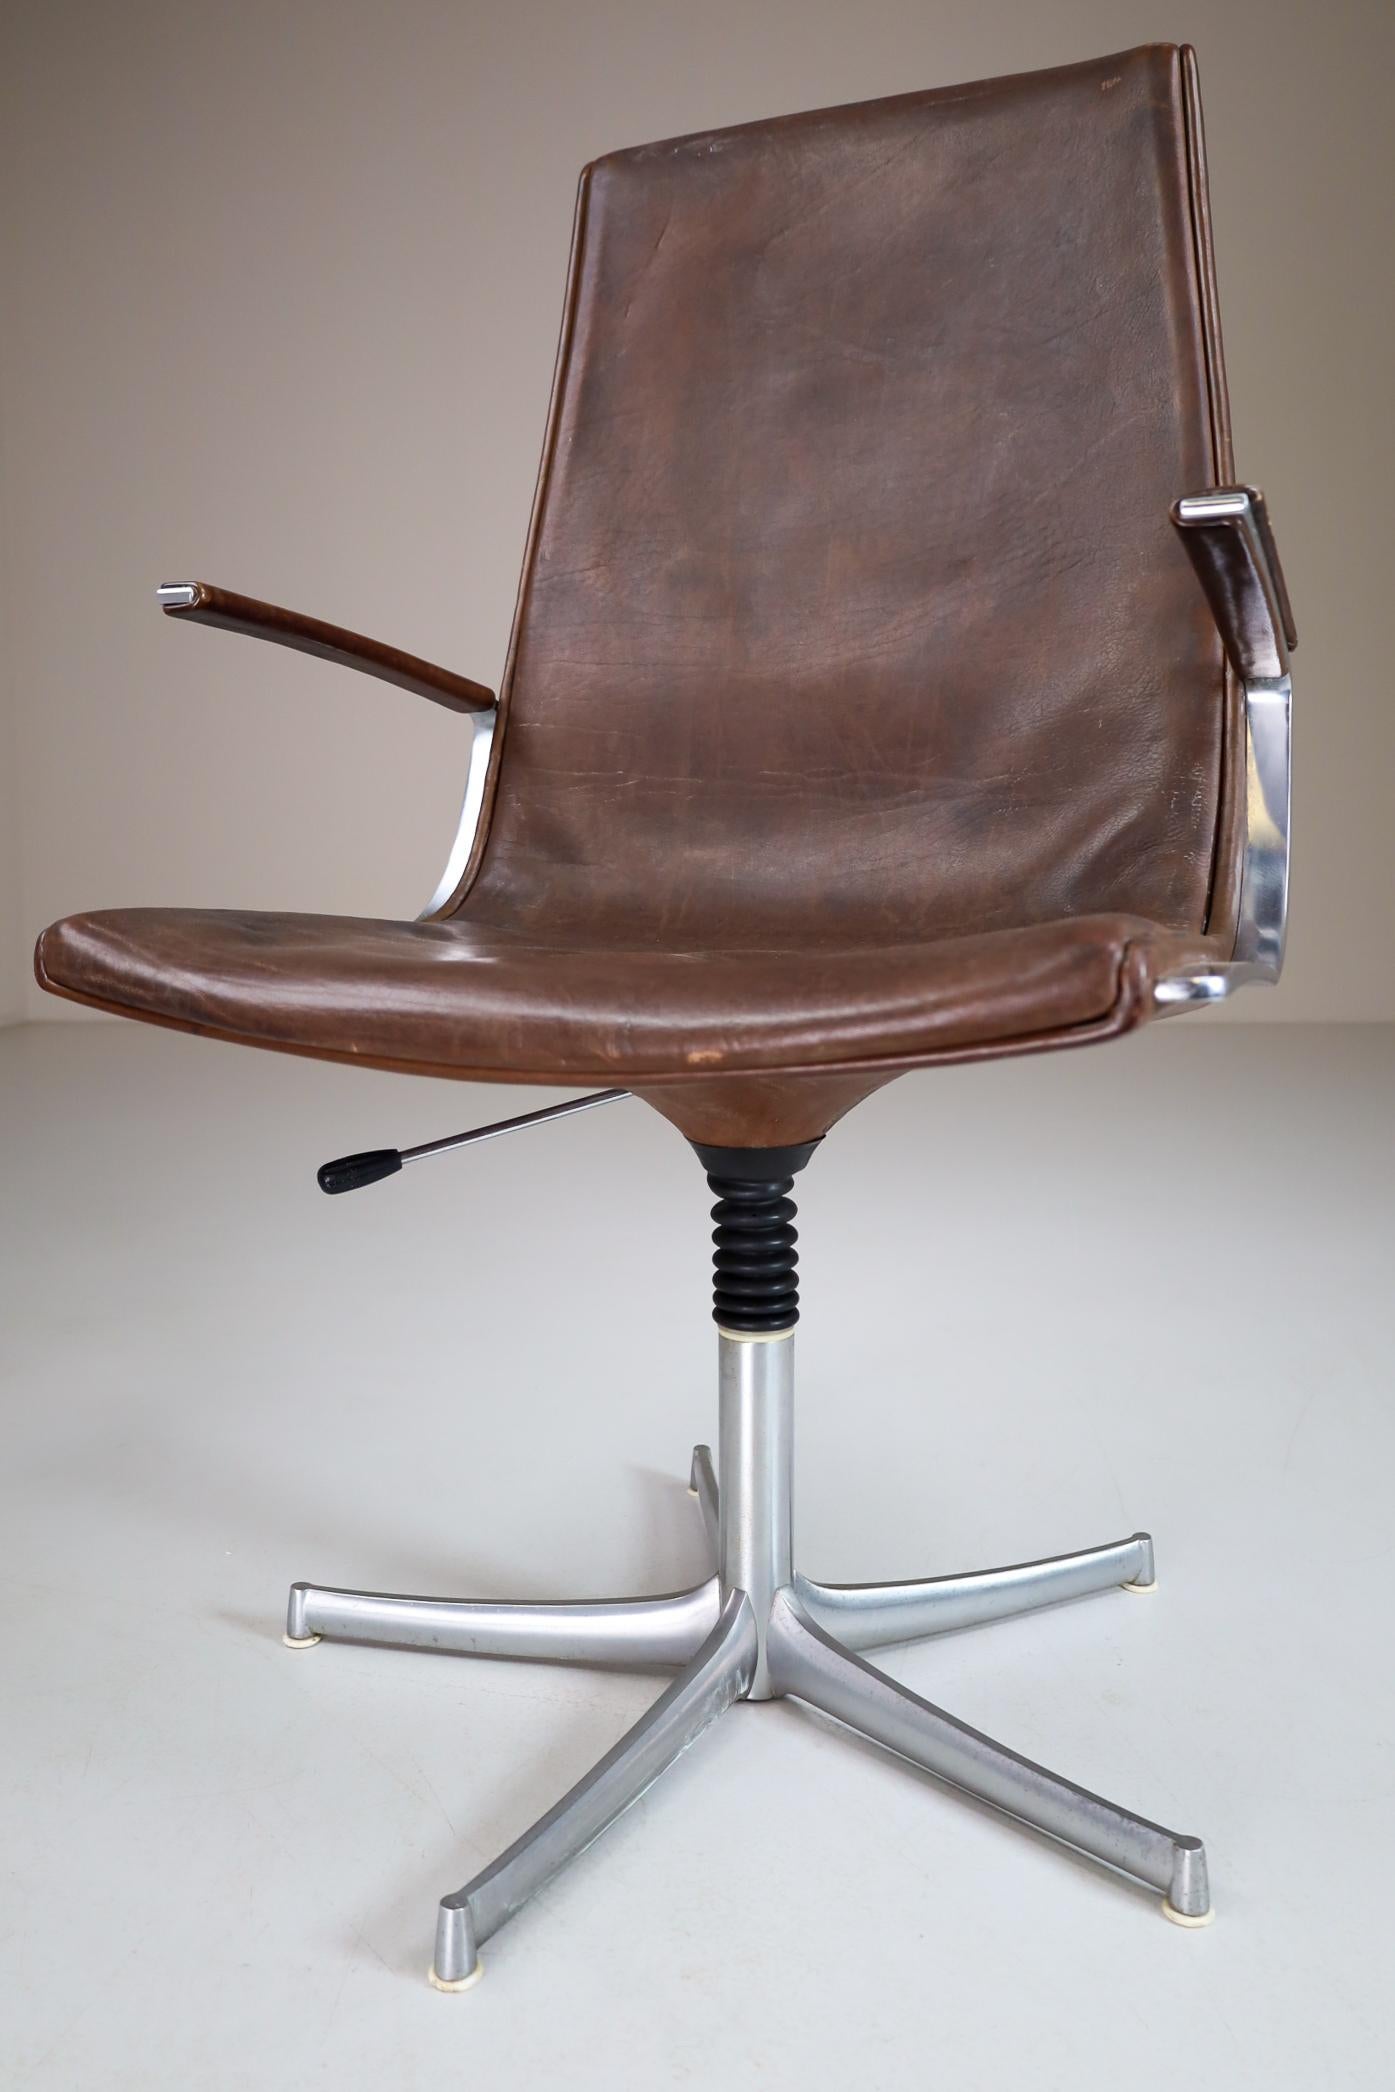 Walter Knoll office/desk chair, Germany, 1970. The chair swivel 360º and are adjustable in height. In very good condition with beautiful patinated leather and thorough polished aluminum. The mechanisms on all the chairs are in perfect working